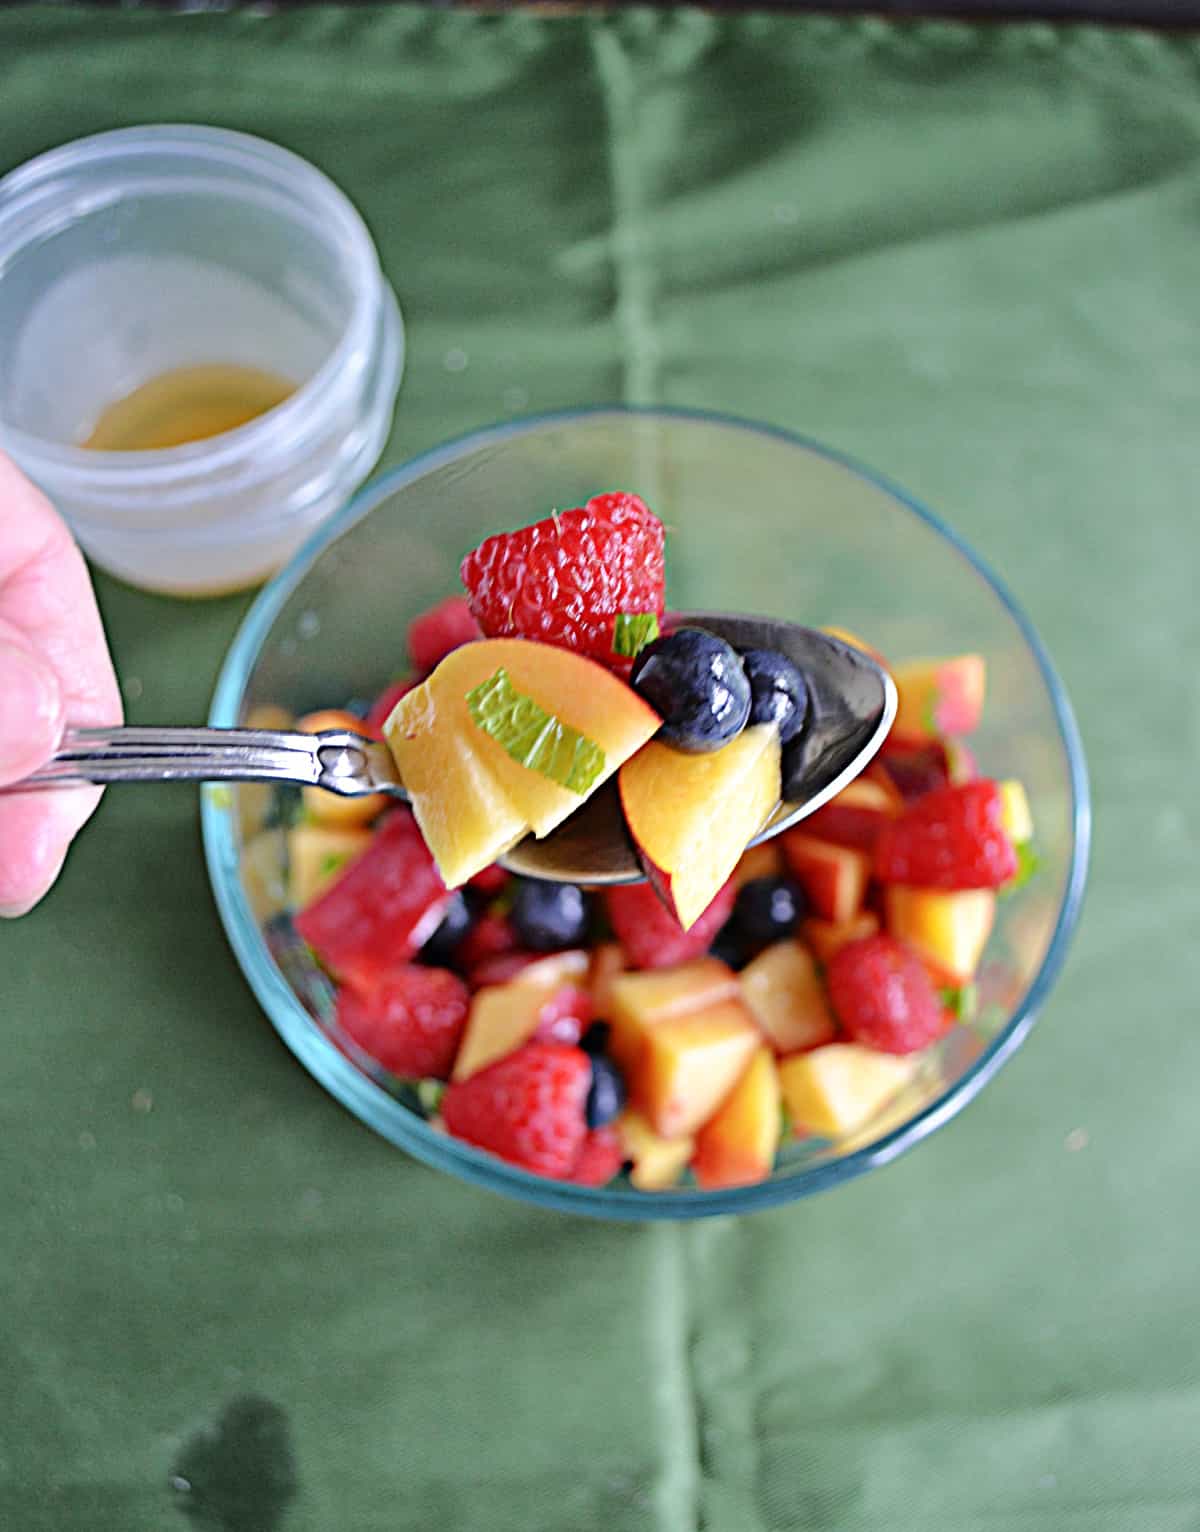 A bowl of fruit with a spoon holding some of it up.